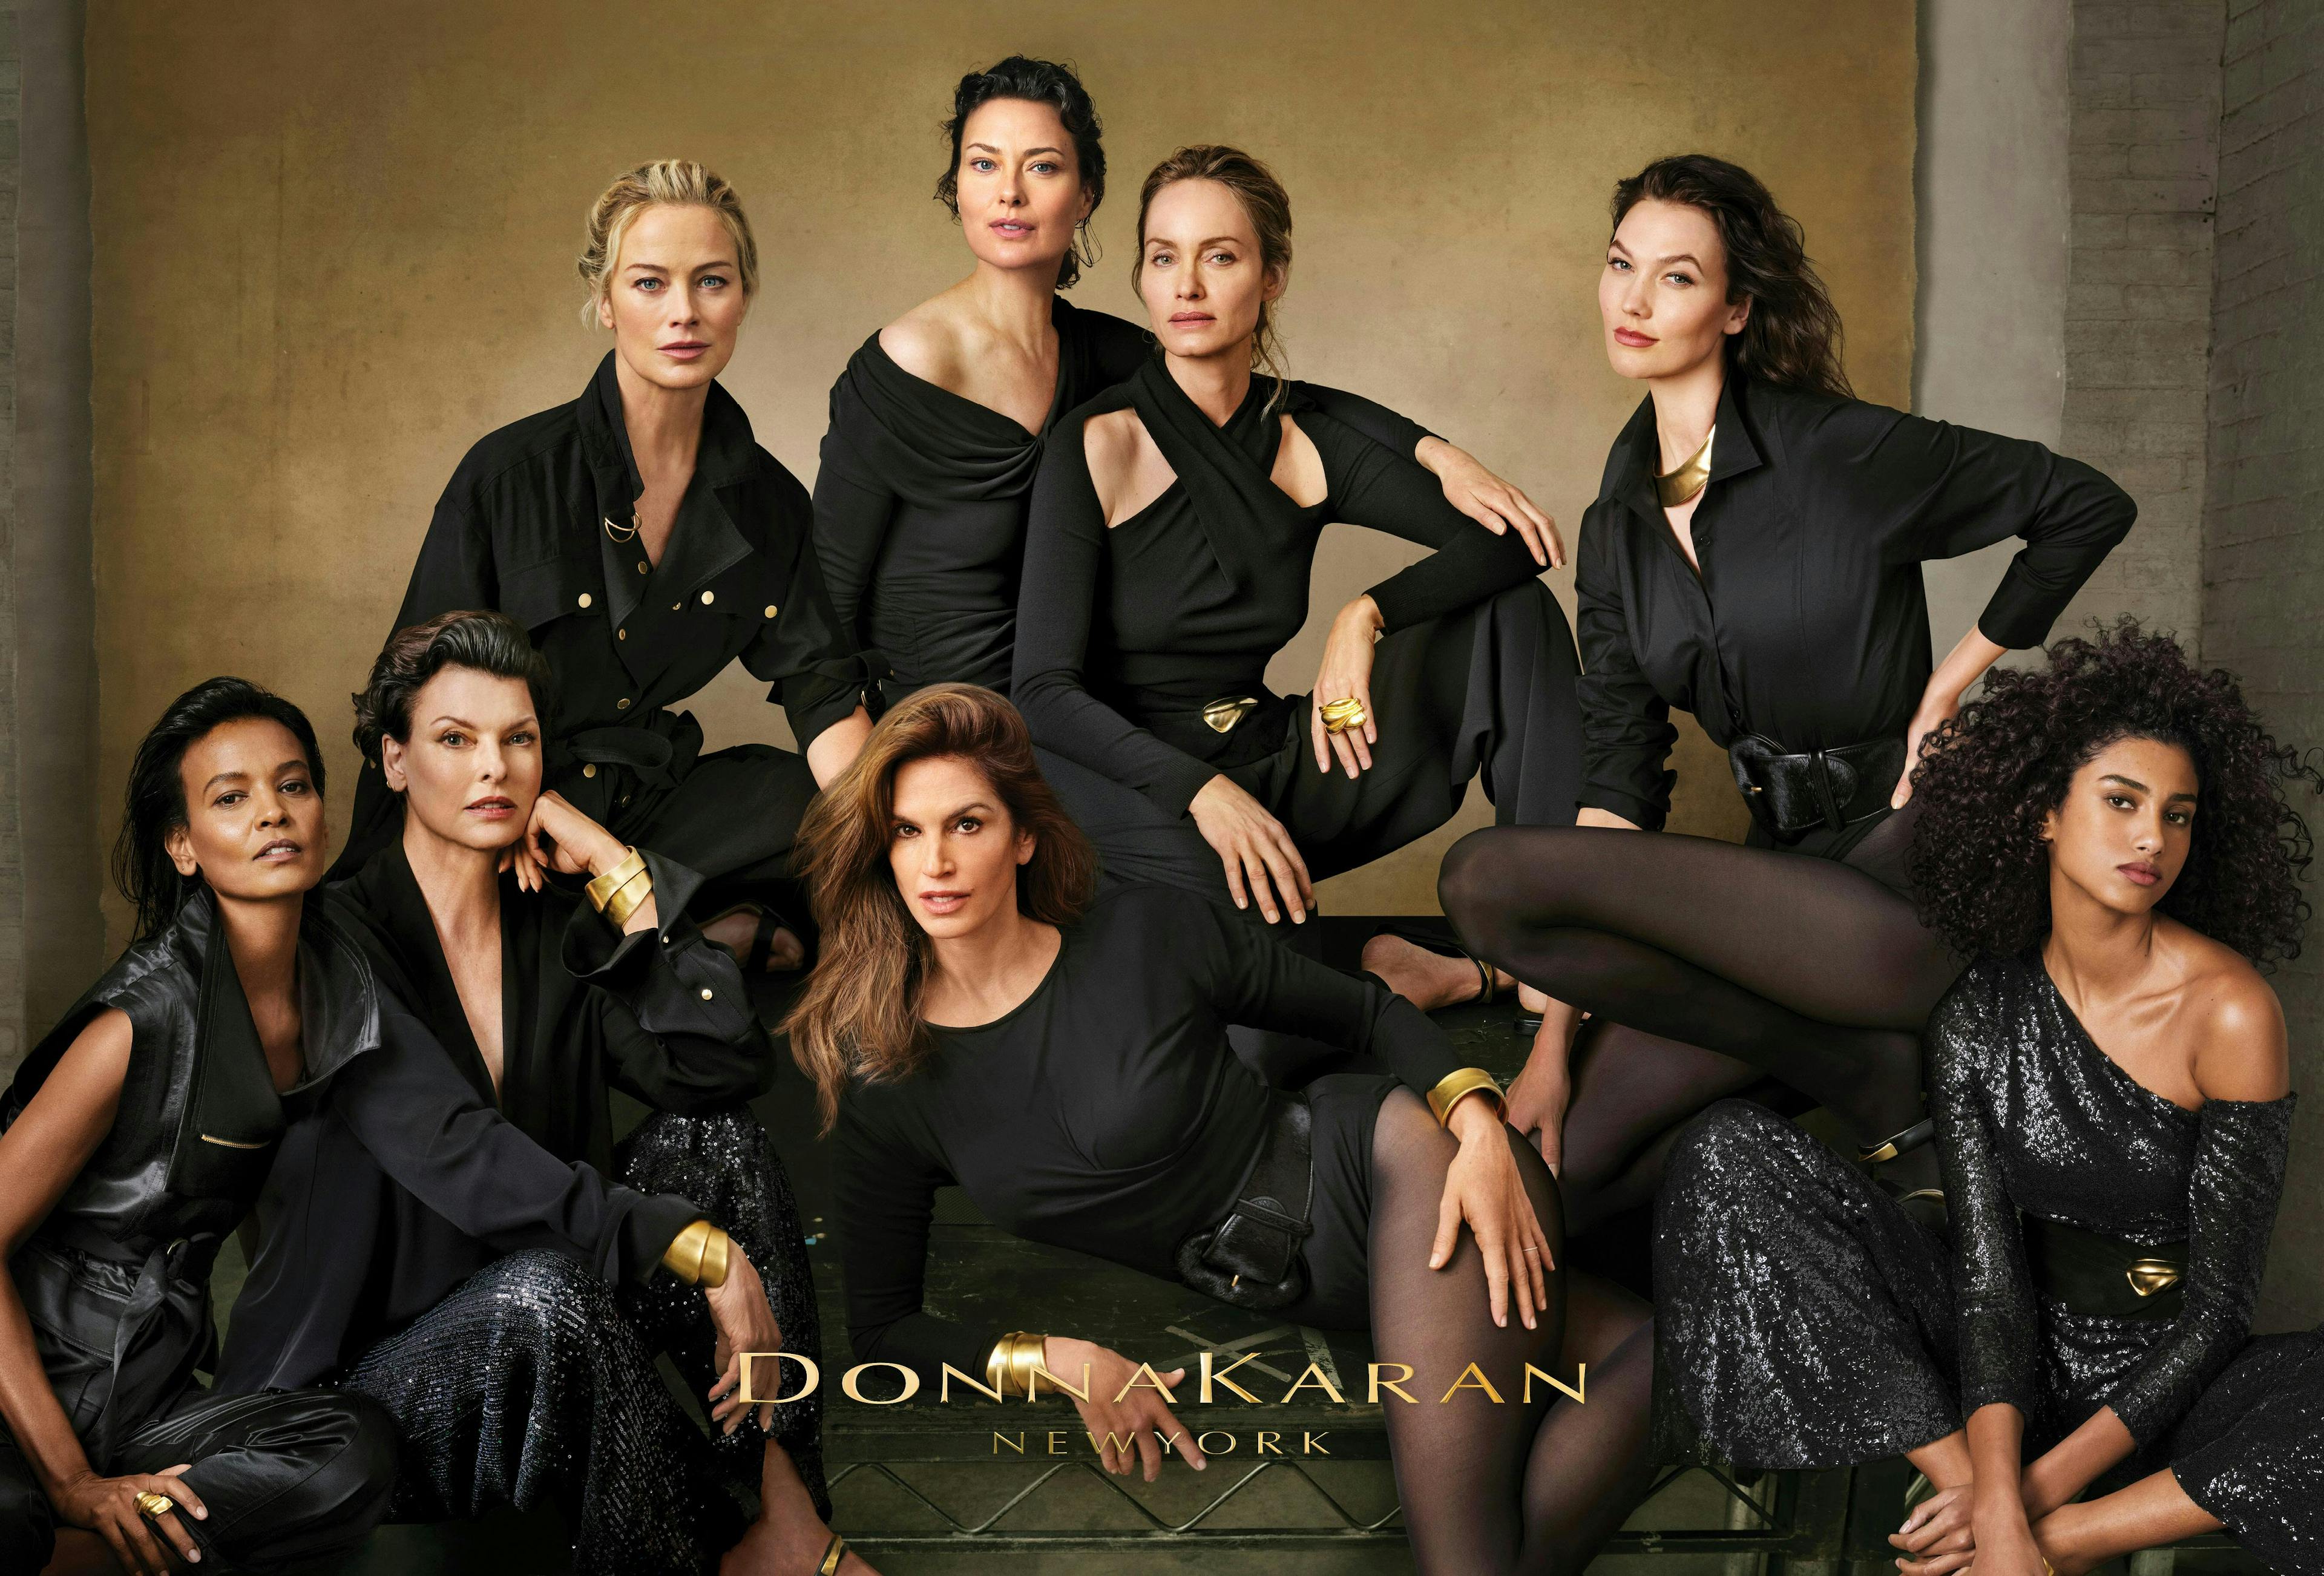 group shot of models wearing all-black clothing